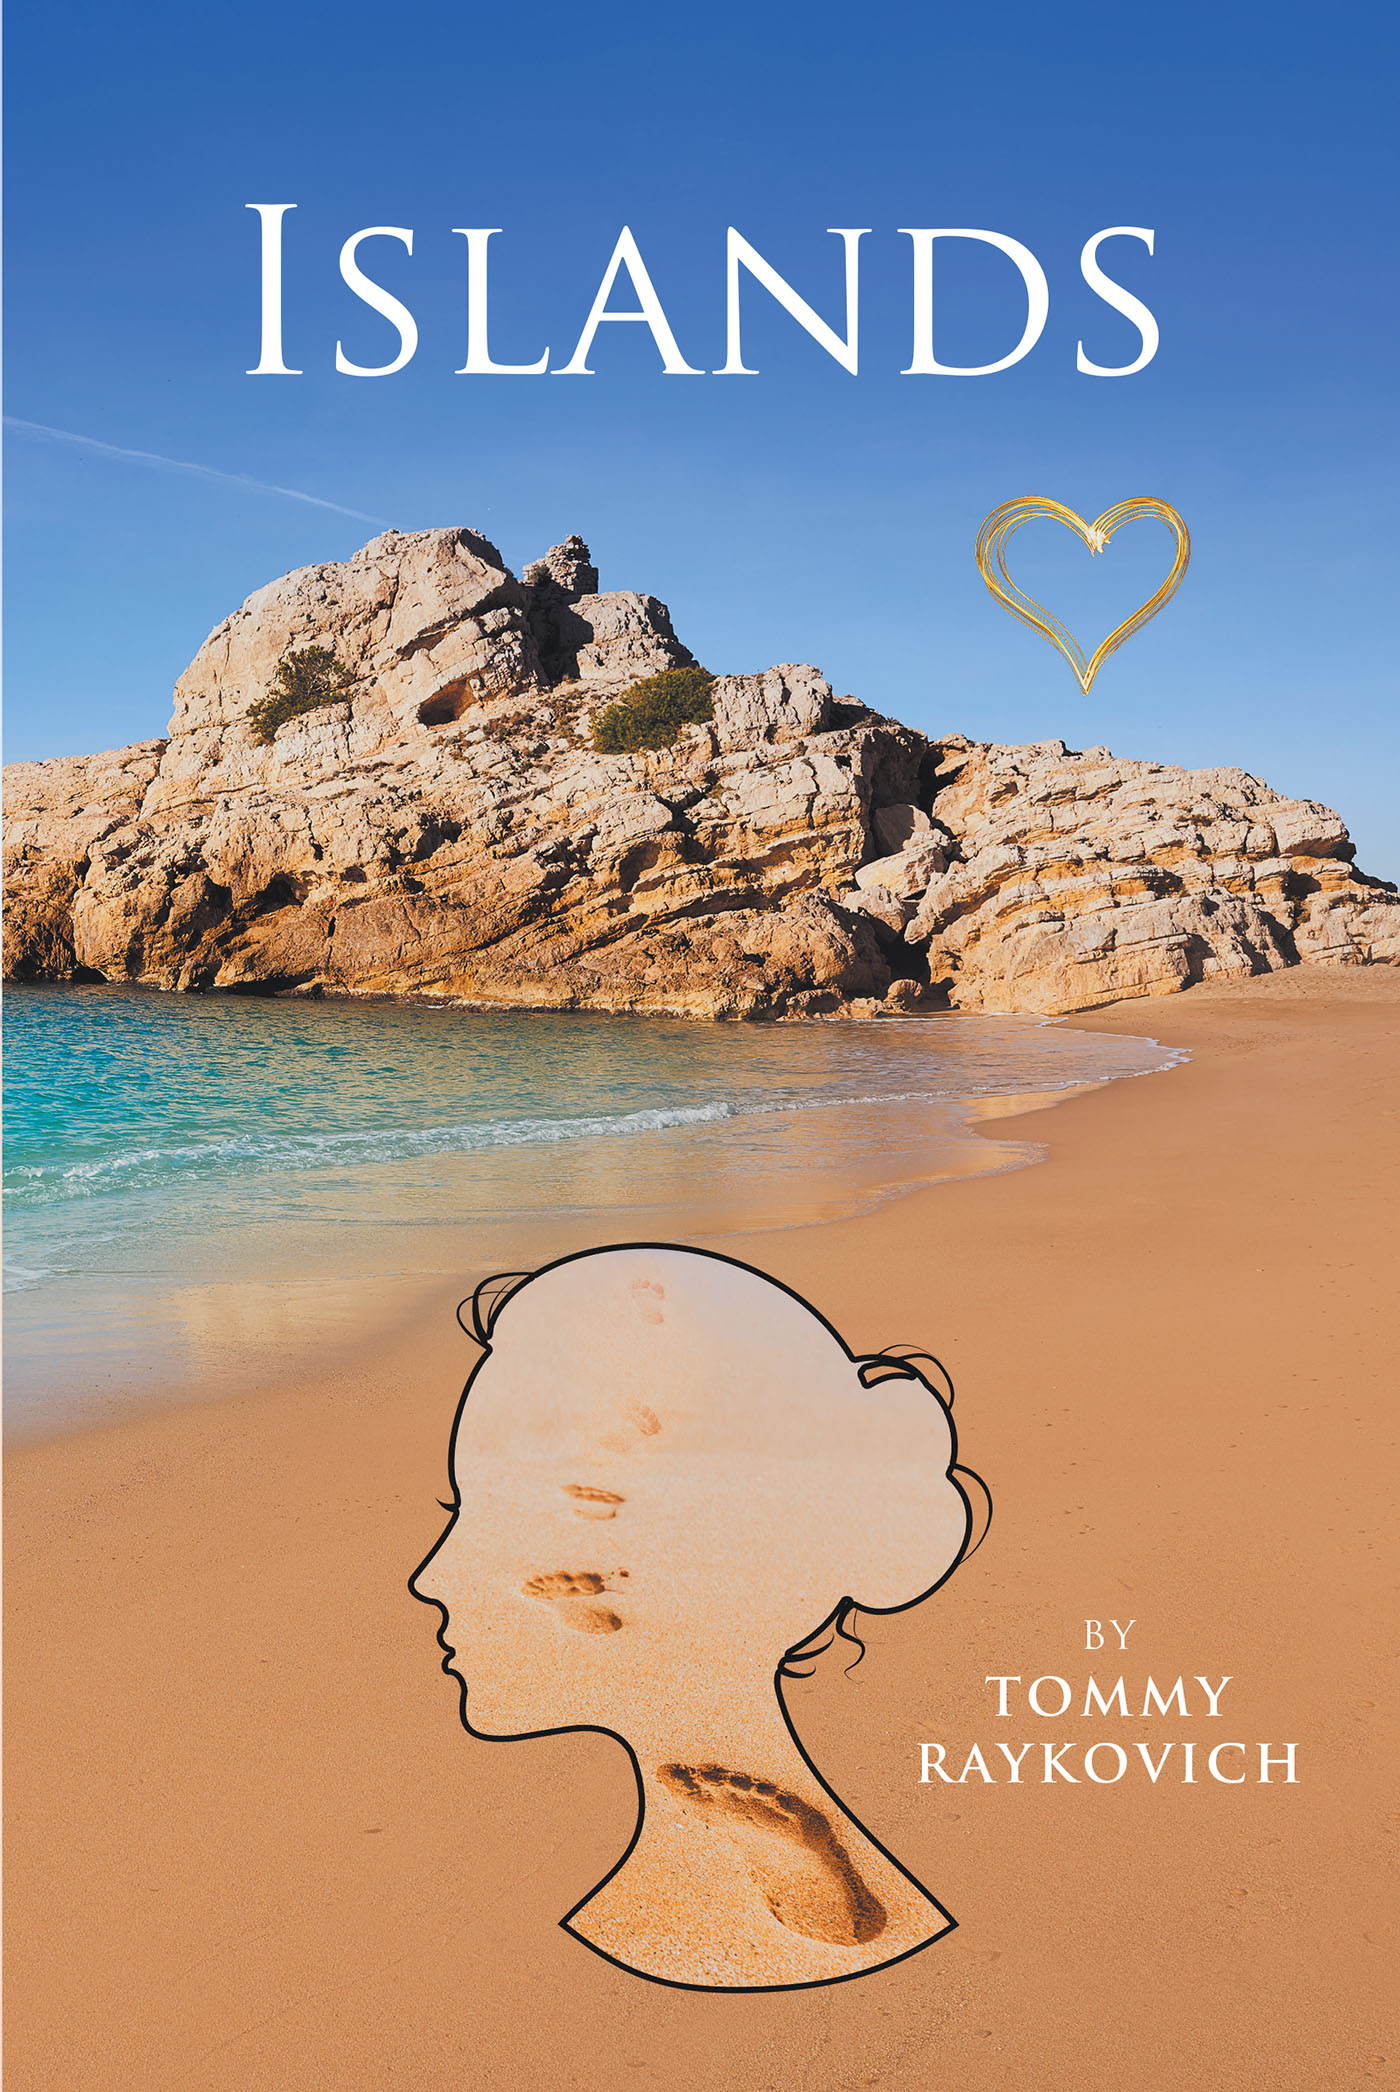 Tommy Raykovich’s Newly Released "ISLANDS" is an Emotionally Charged Story of Love and Self-Discovery